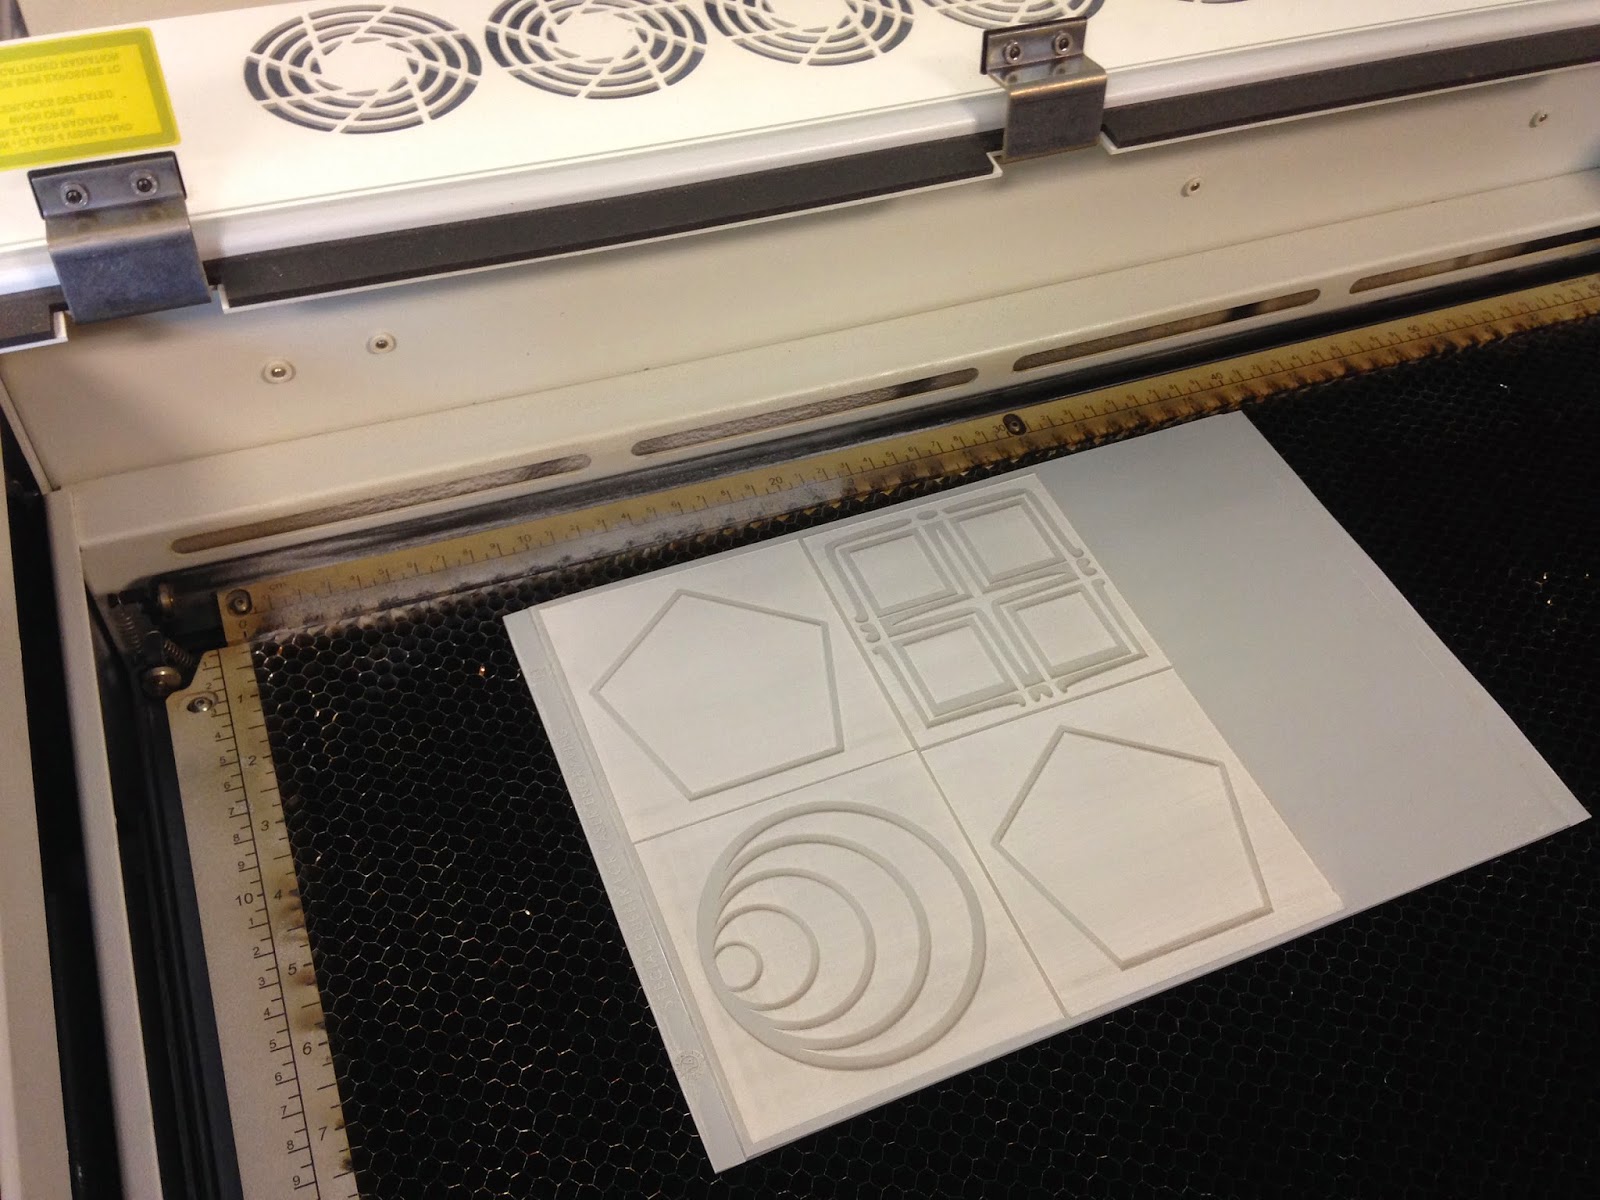 3D Printed TurtleArt Stamps for Clay Tiles